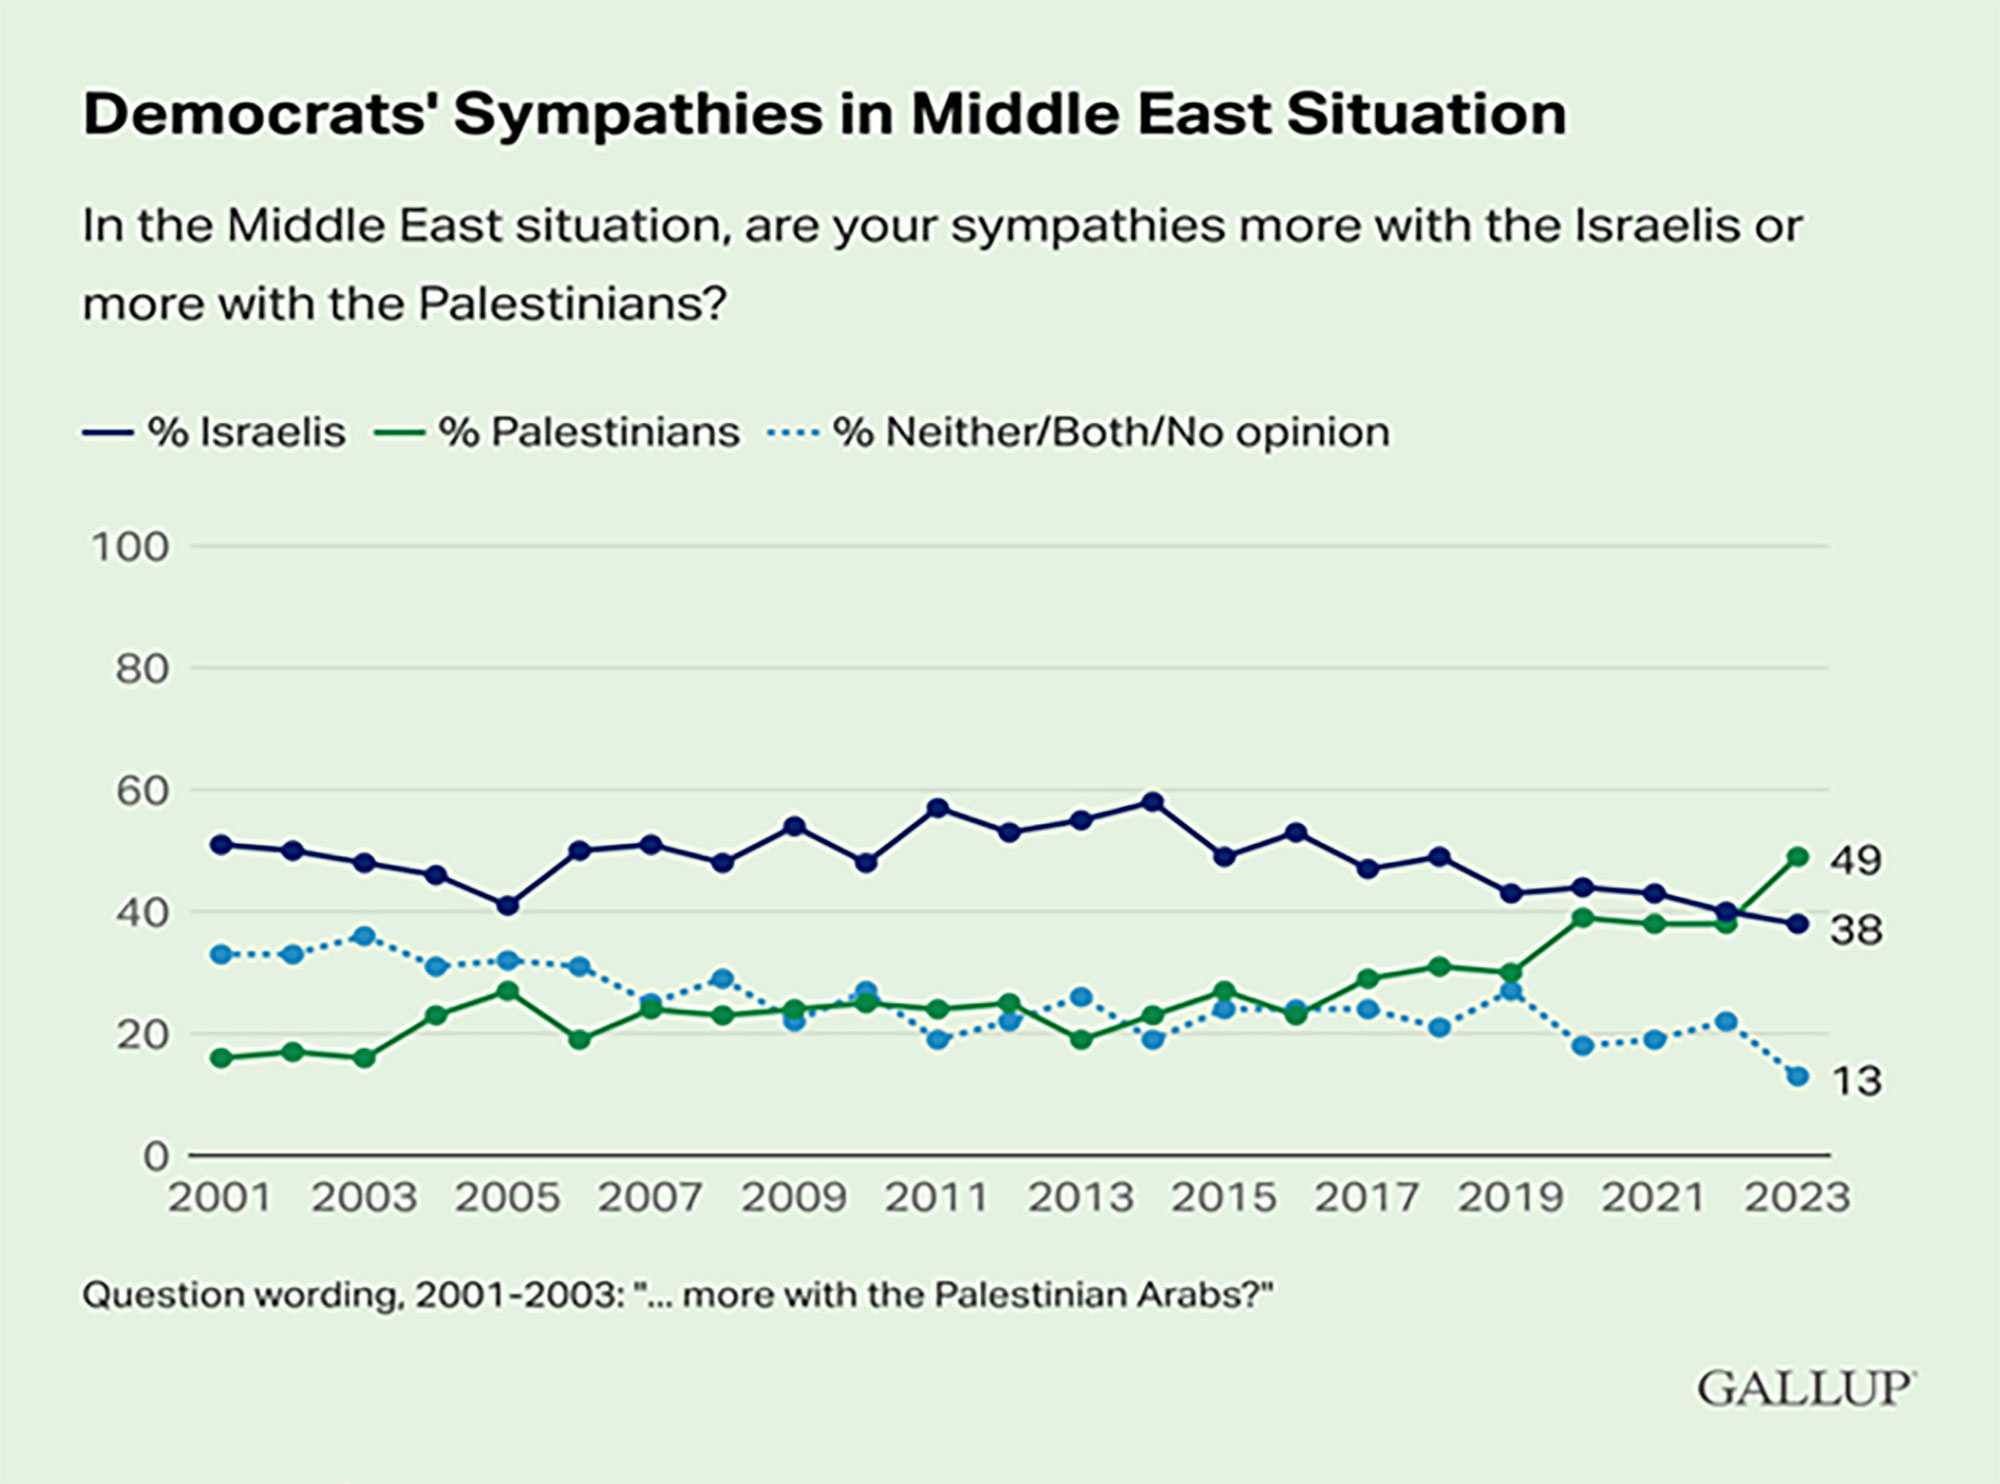 "line chart showing views of Democrats' sympathies in the Middle East"